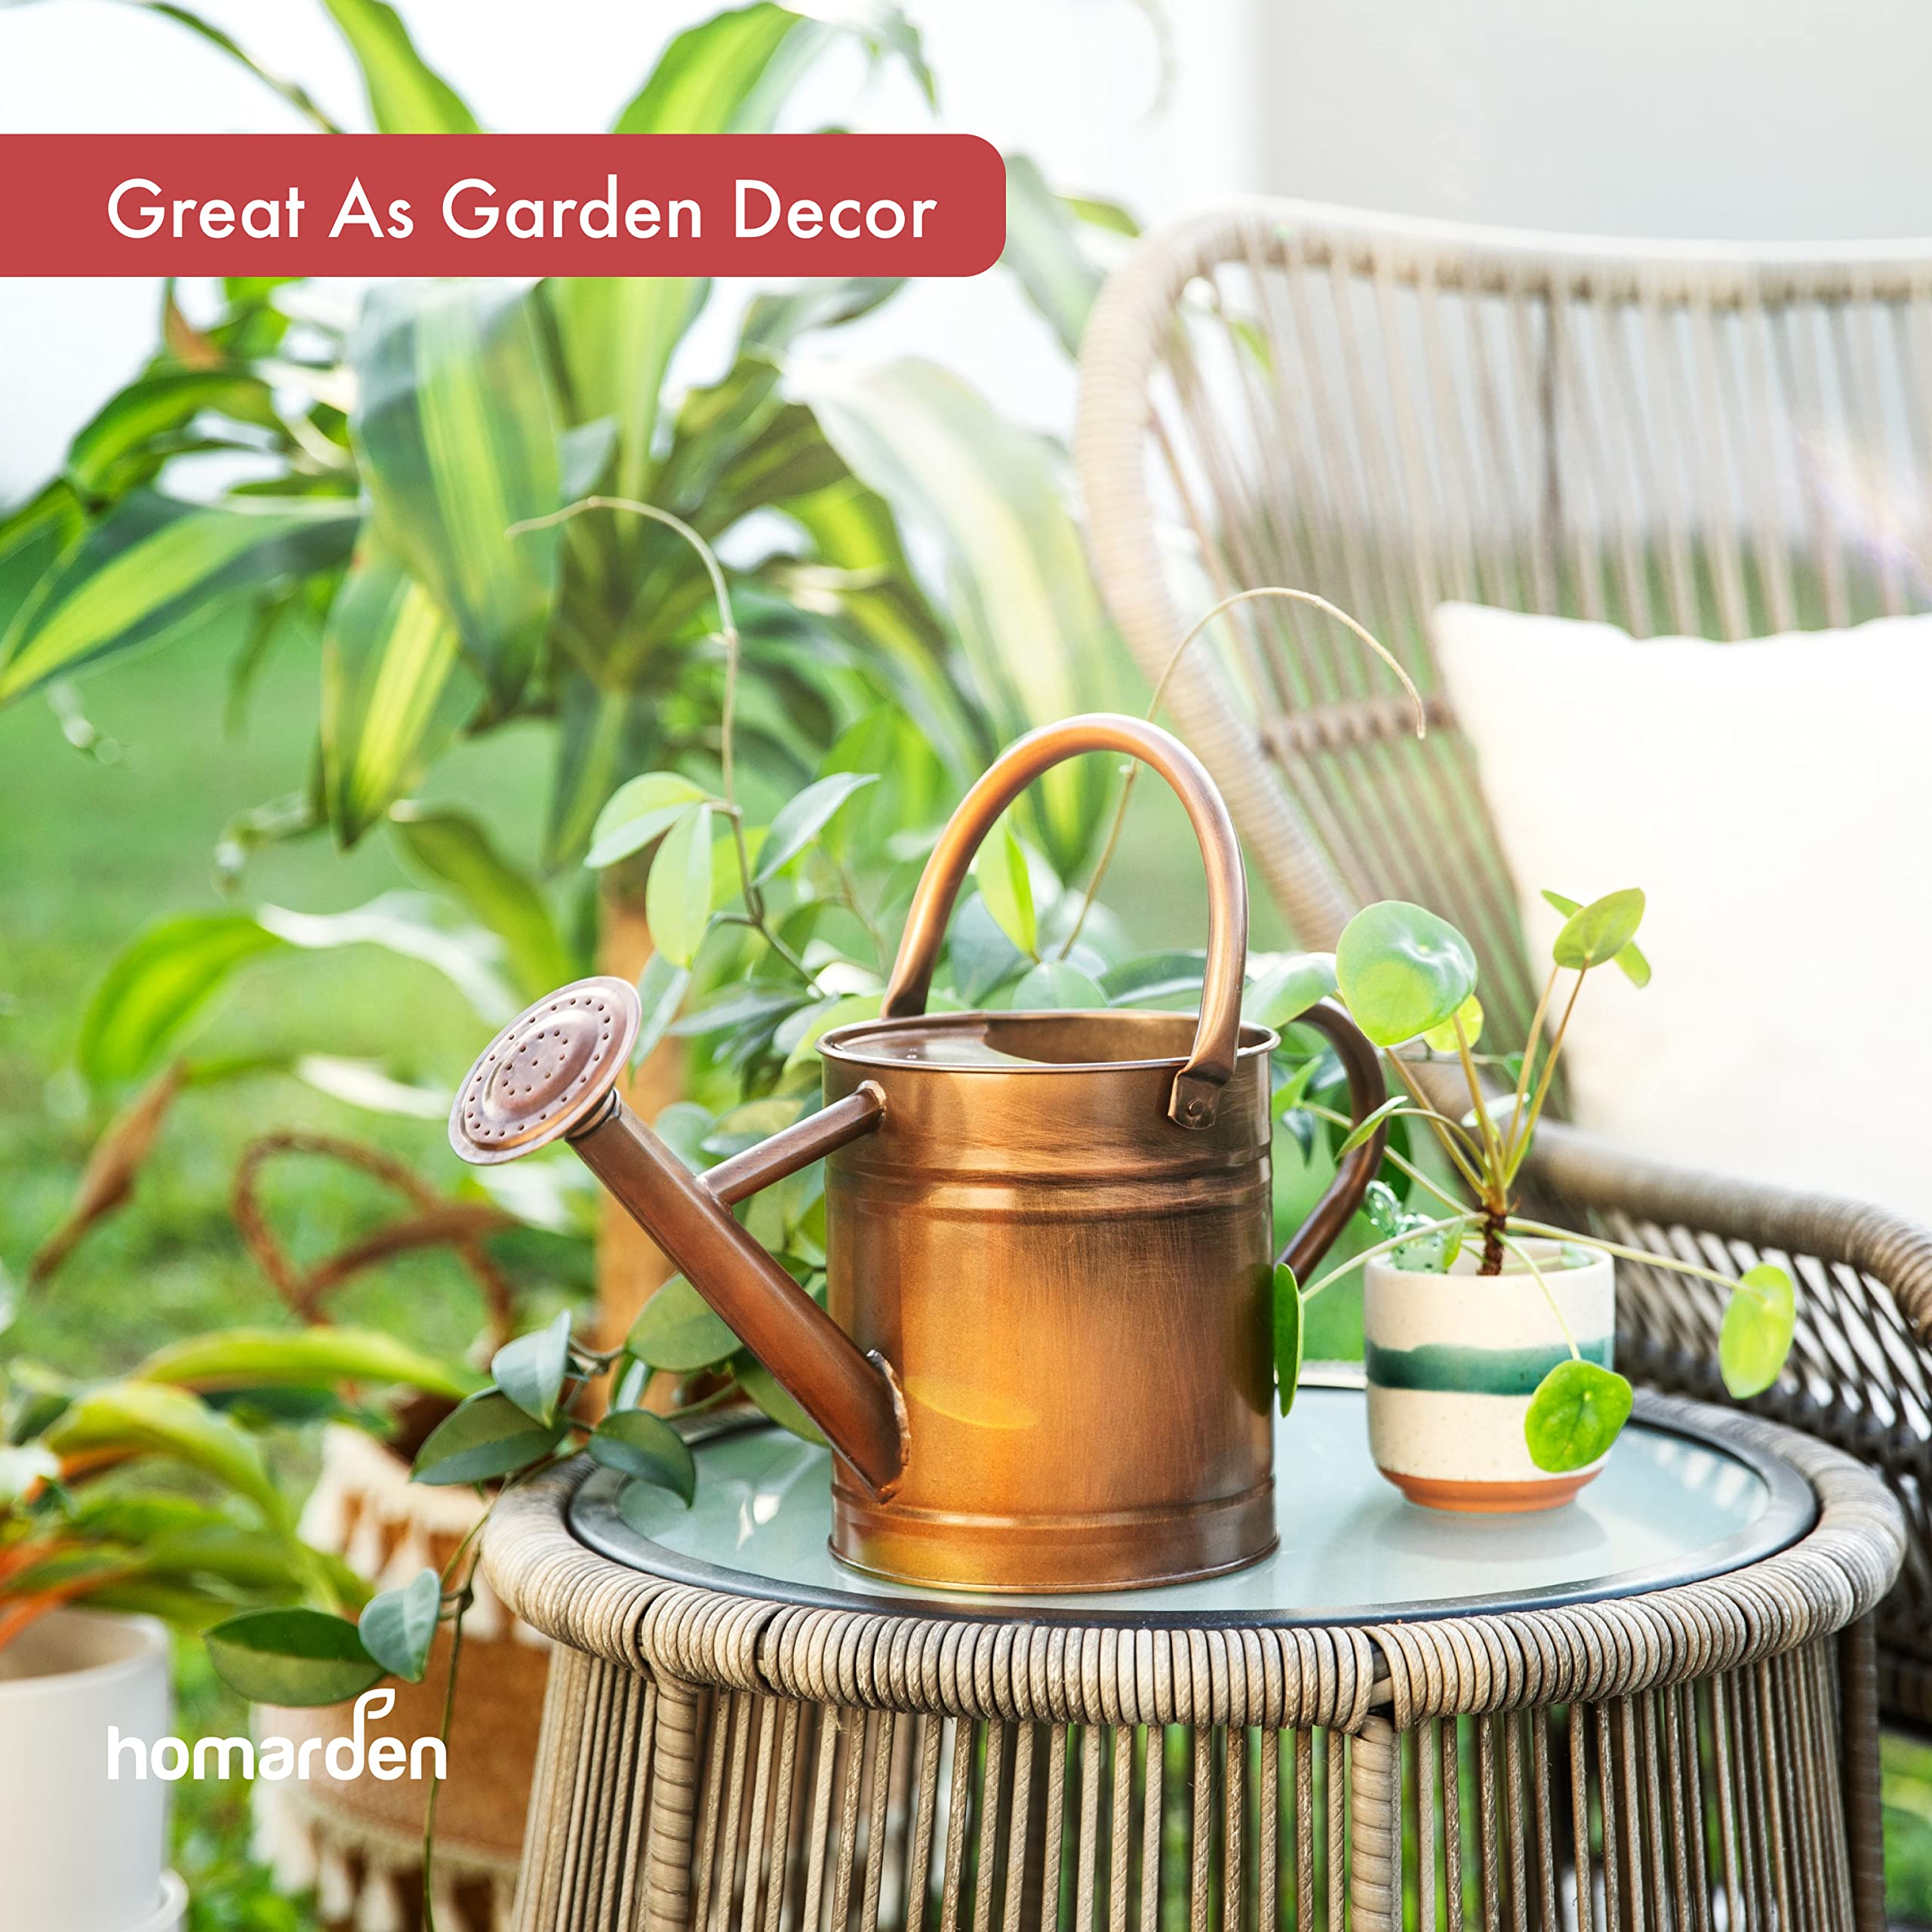 Homarden 1 Gallon Copper Decorative Watering Can - Metal Watering Cans for Indoor and Outdoor House Plants - Removable Spout and Dual Handles - Small Watering Can for Bonsai Plant - 16.1Dx6.2Wx7.9H in